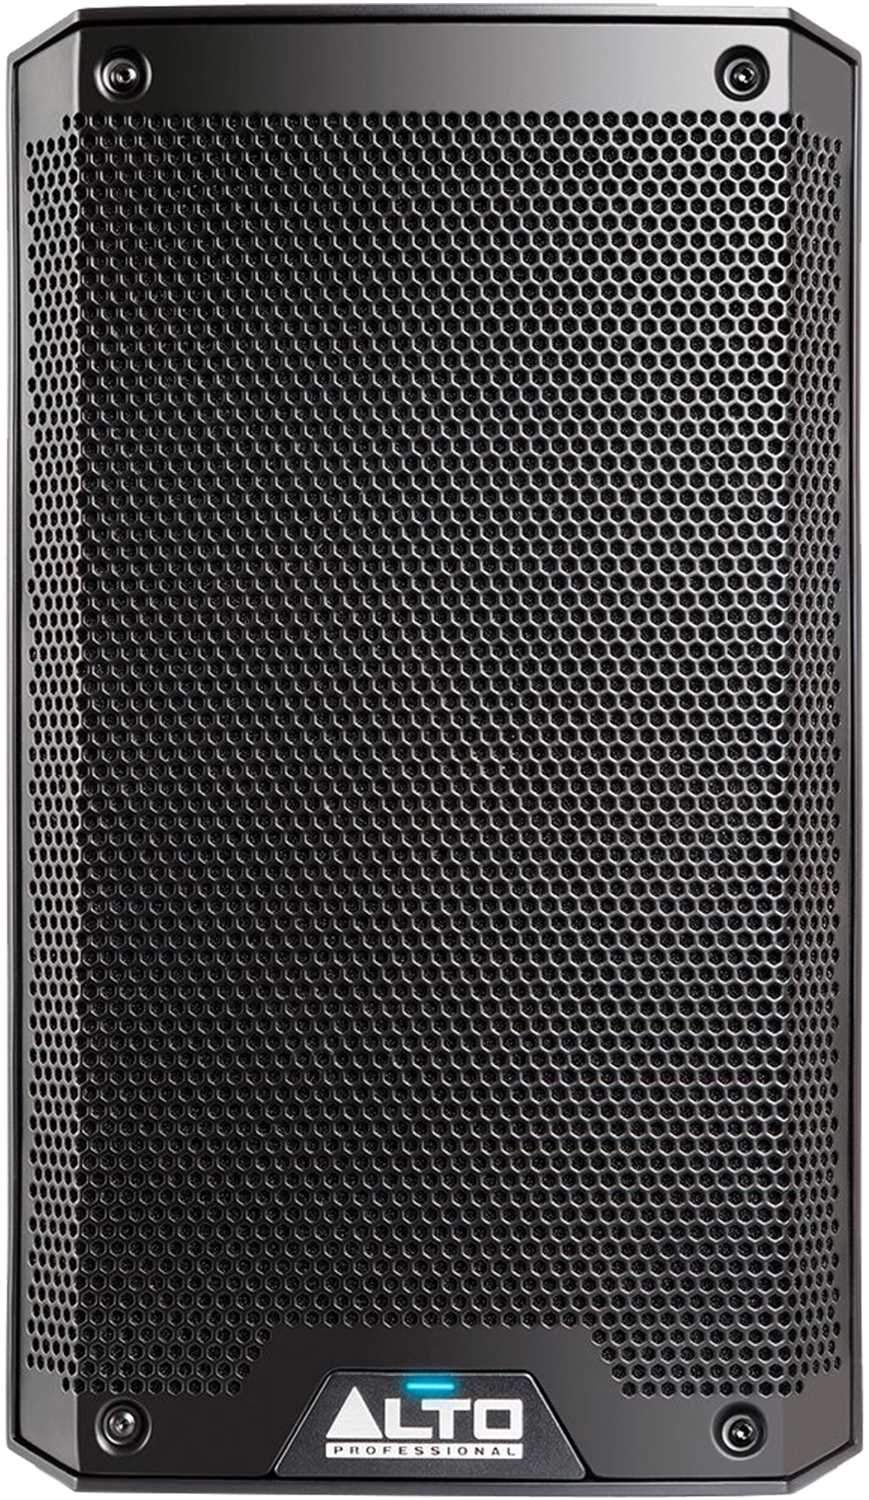 Alto Professional TS308 8-Inch 2 Way Powered Speakers with Gator Totes - PSSL ProSound and Stage Lighting